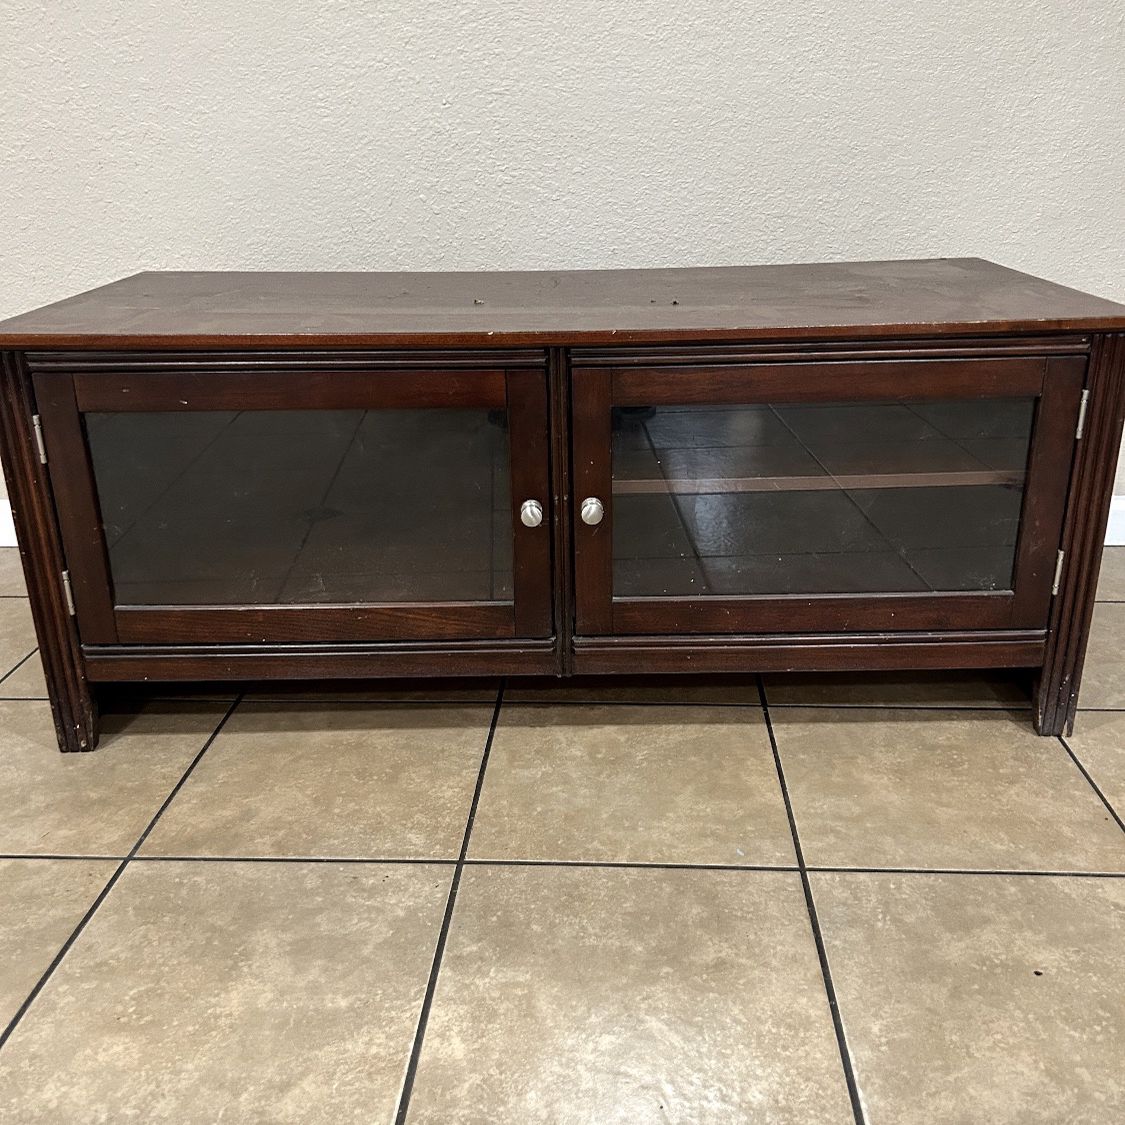 Tv Stand With Glass Doors